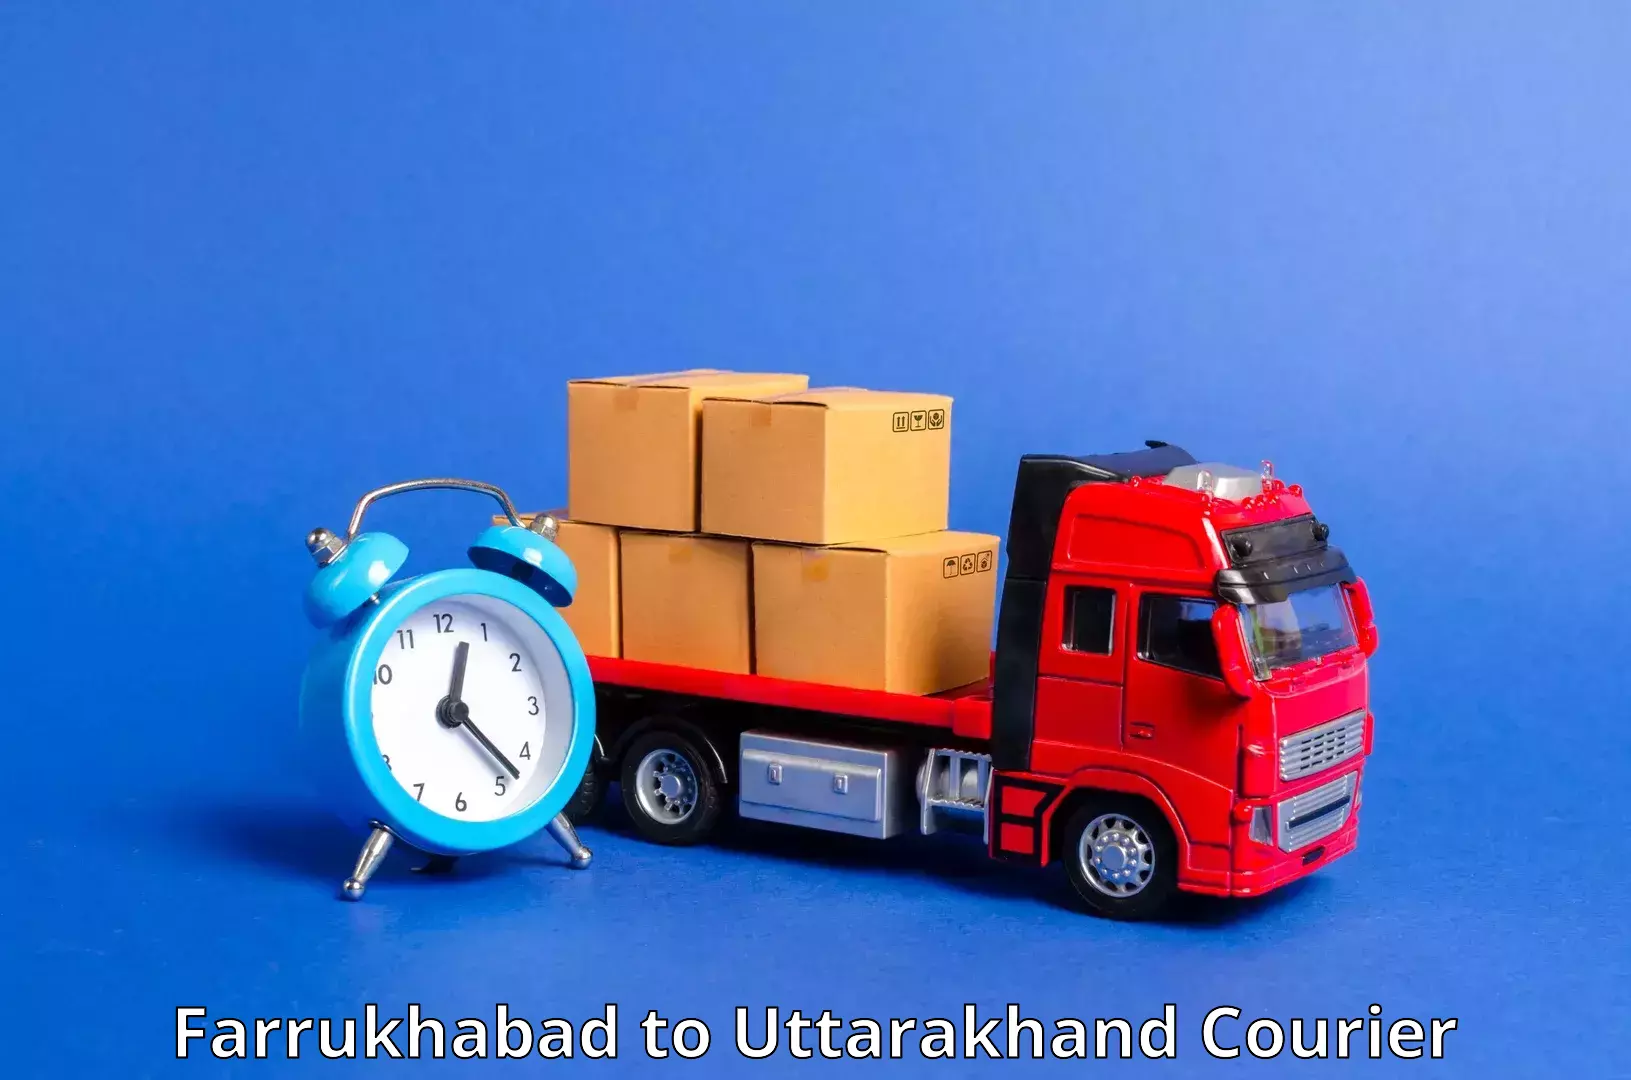 Express package services Farrukhabad to Rudraprayag